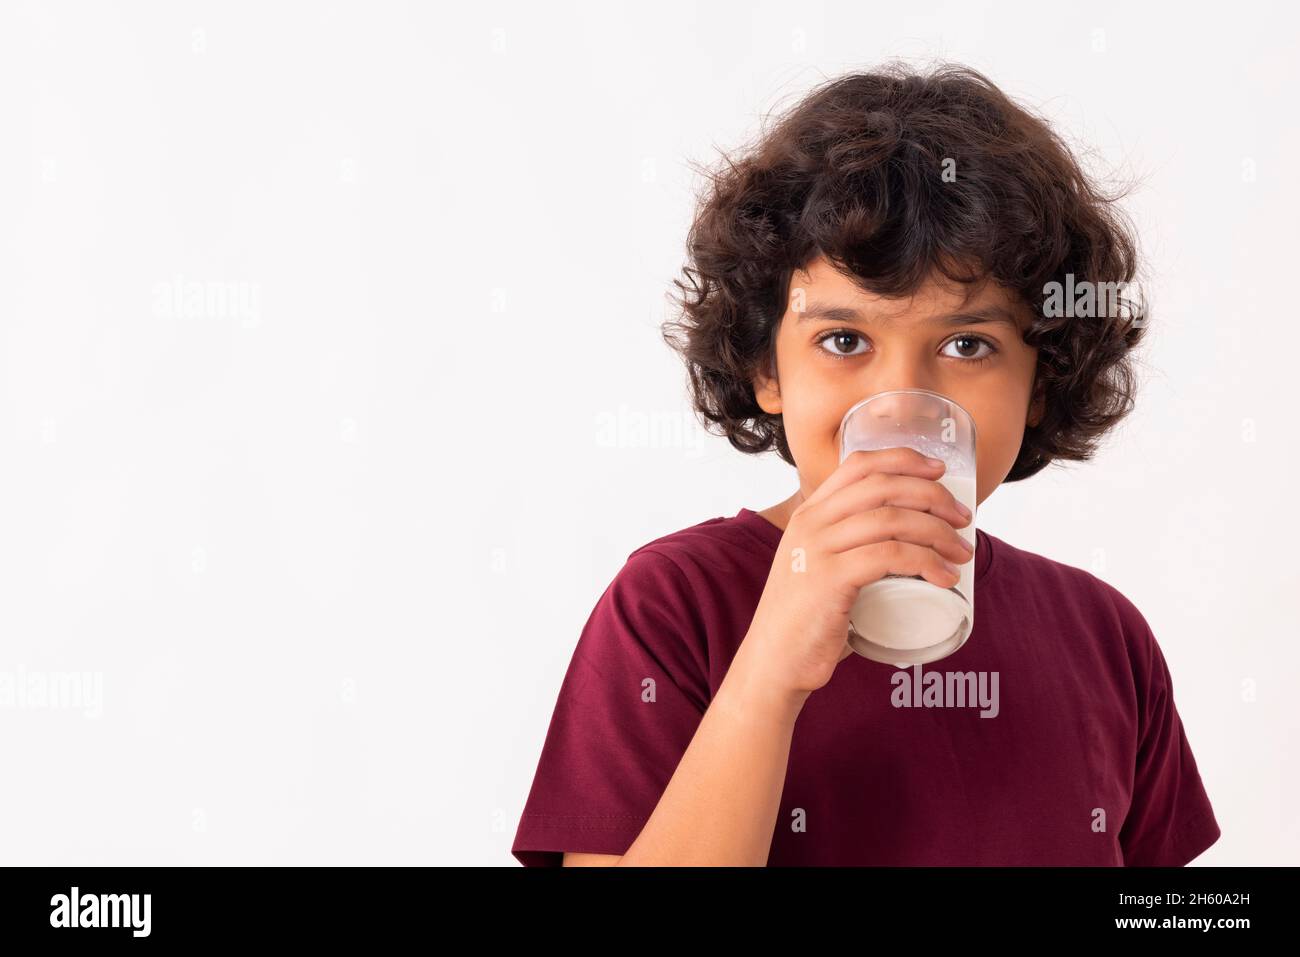 A YOUNG BOY DRINKING A GLASS OF MILK WHILE LOOKING AT CAMERA Stock Photo